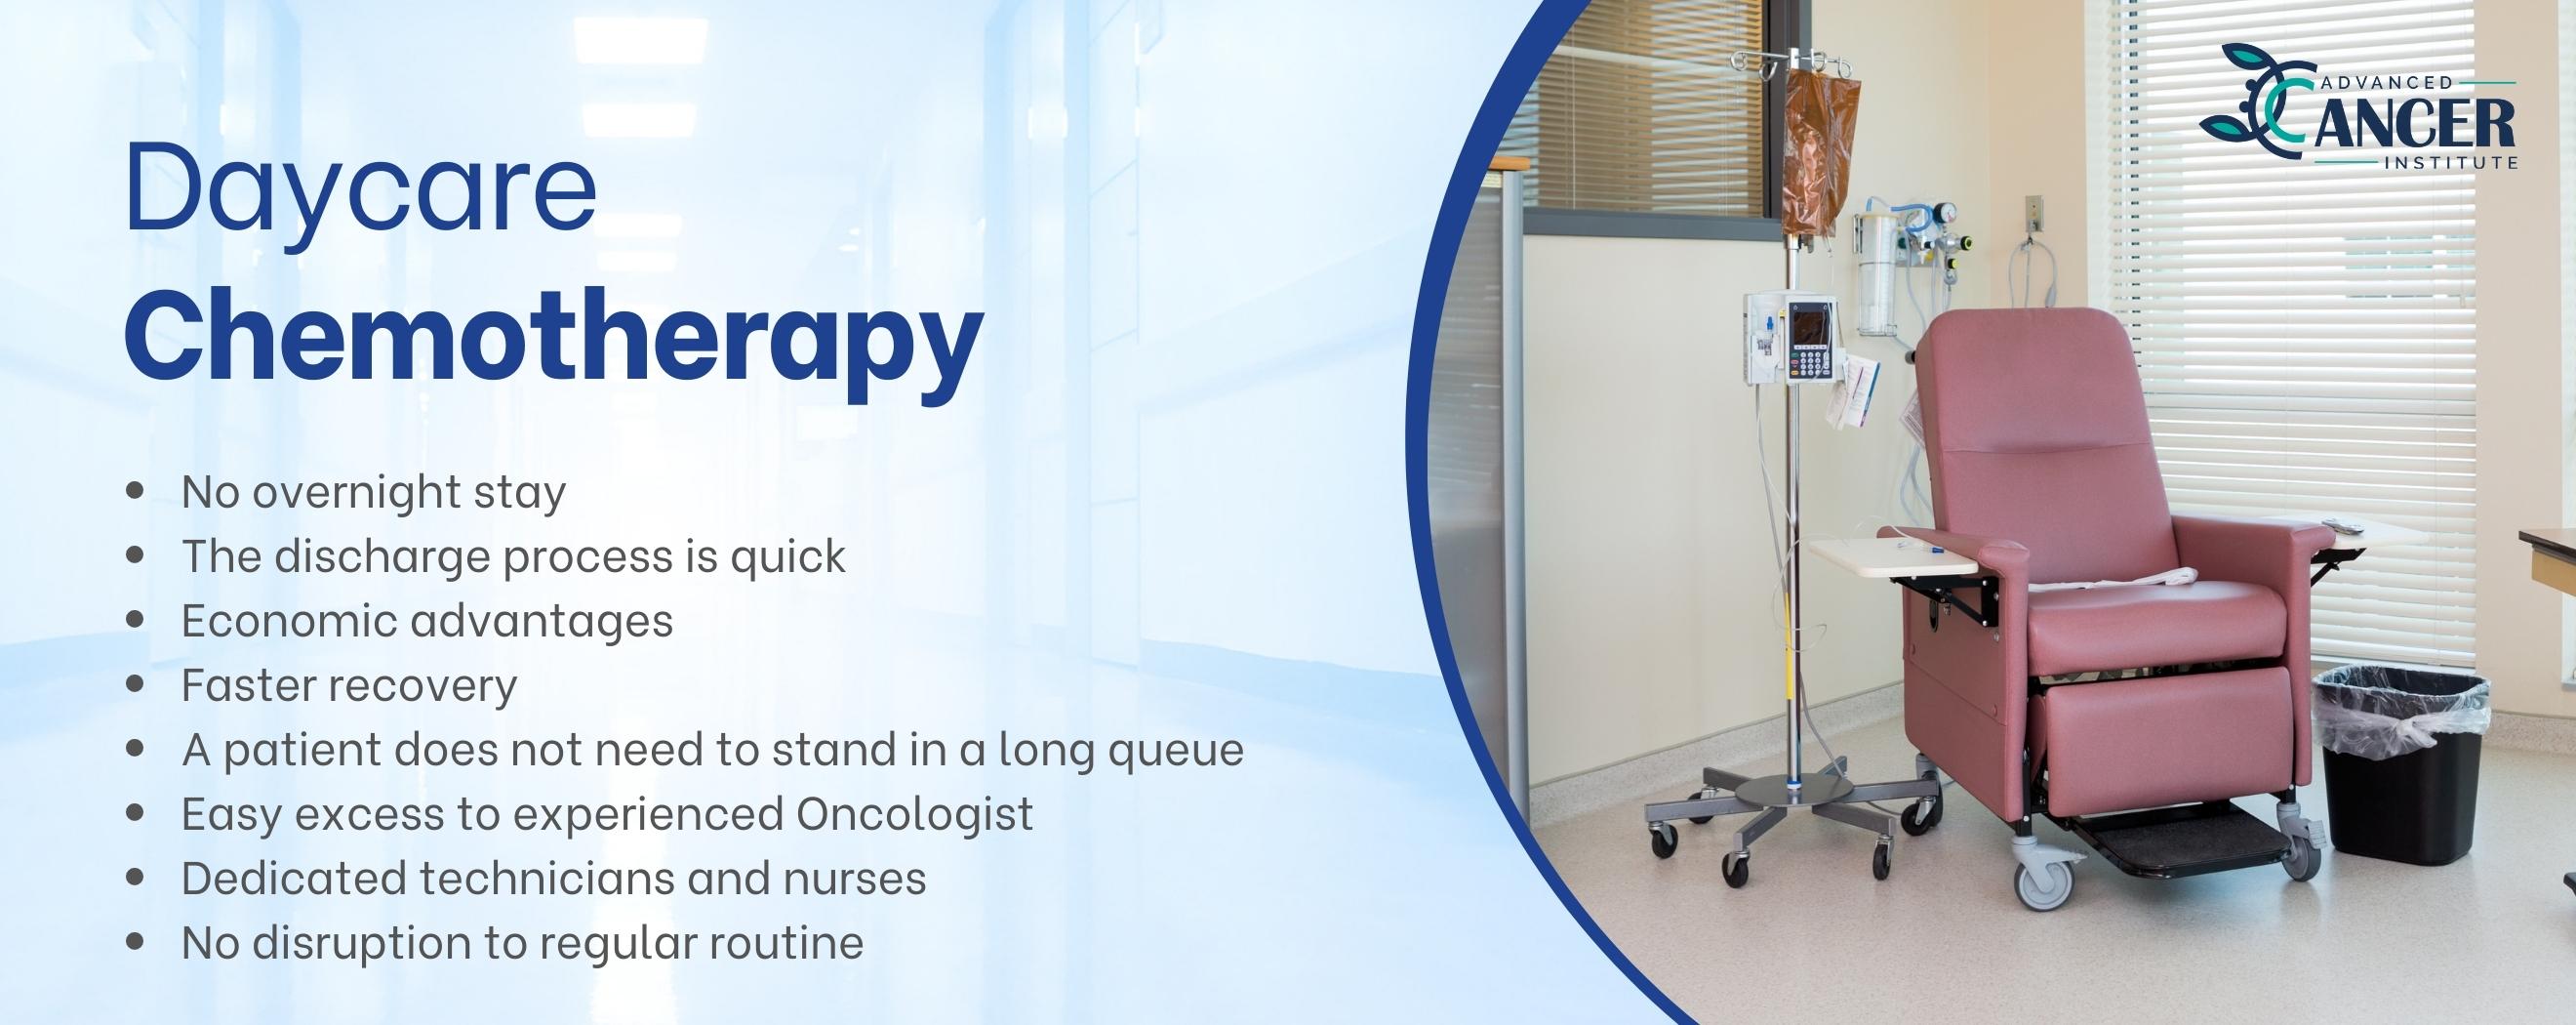 BEST ONCOLOGY HOSPITAL TREATMENT IN PUNJAB